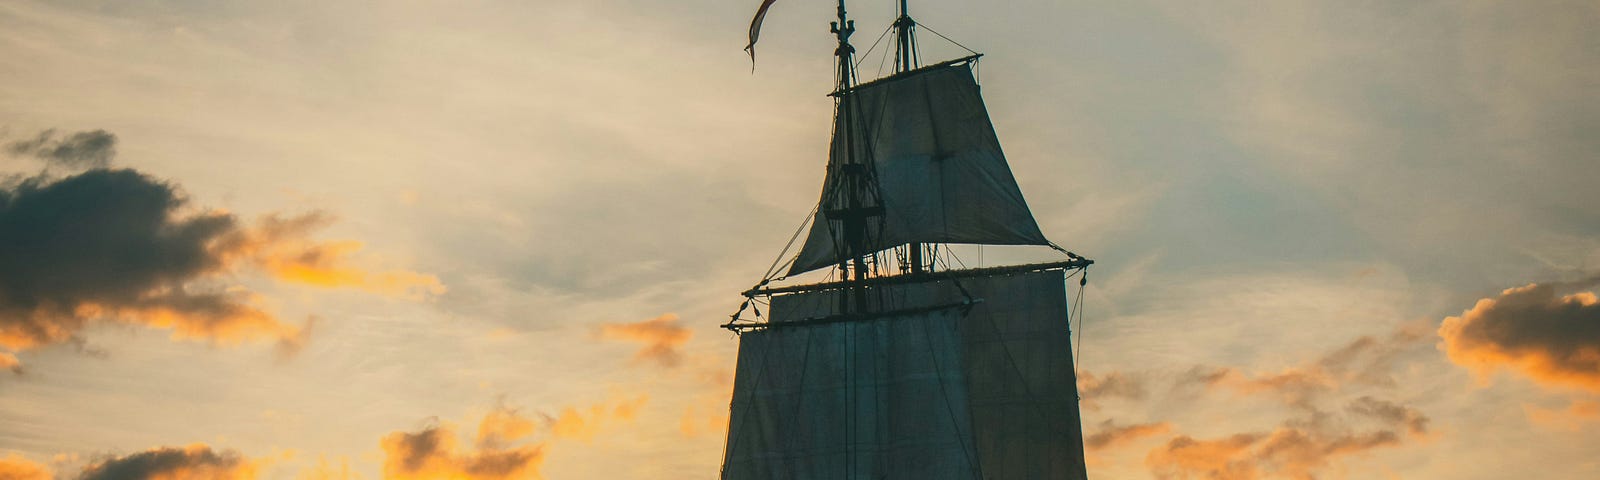 A pirate ship sailing to the horizon with the bright orange sunset unfolding before it.